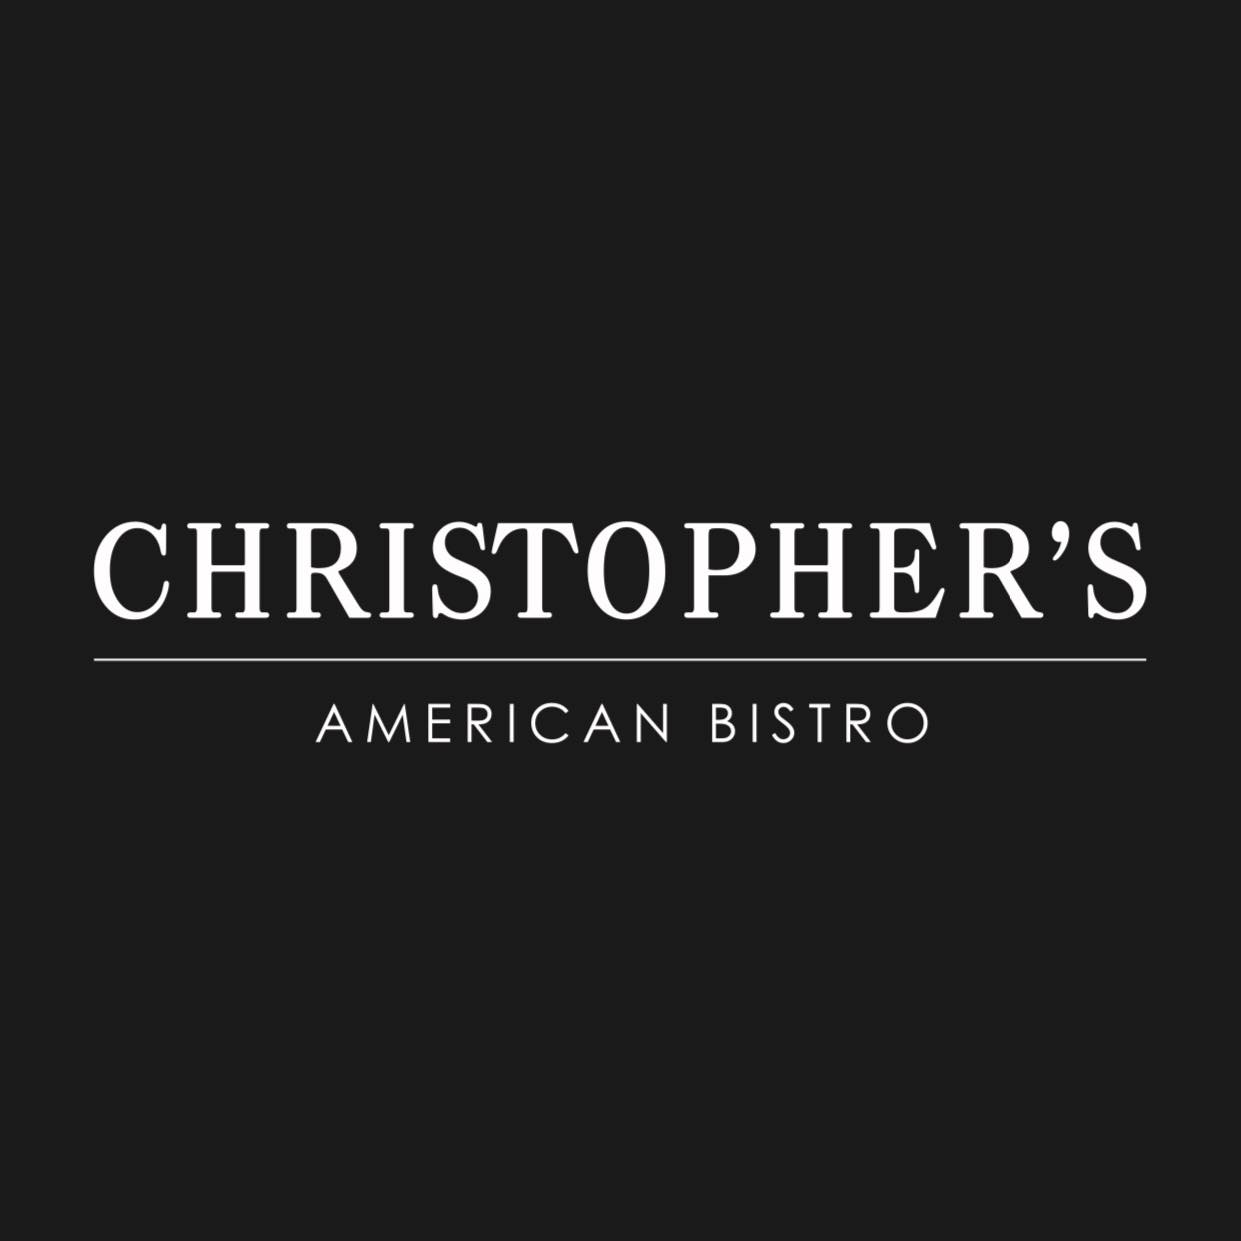 SOLD OUT-Thanksgiving Dinner-Christopher’s American Bistro